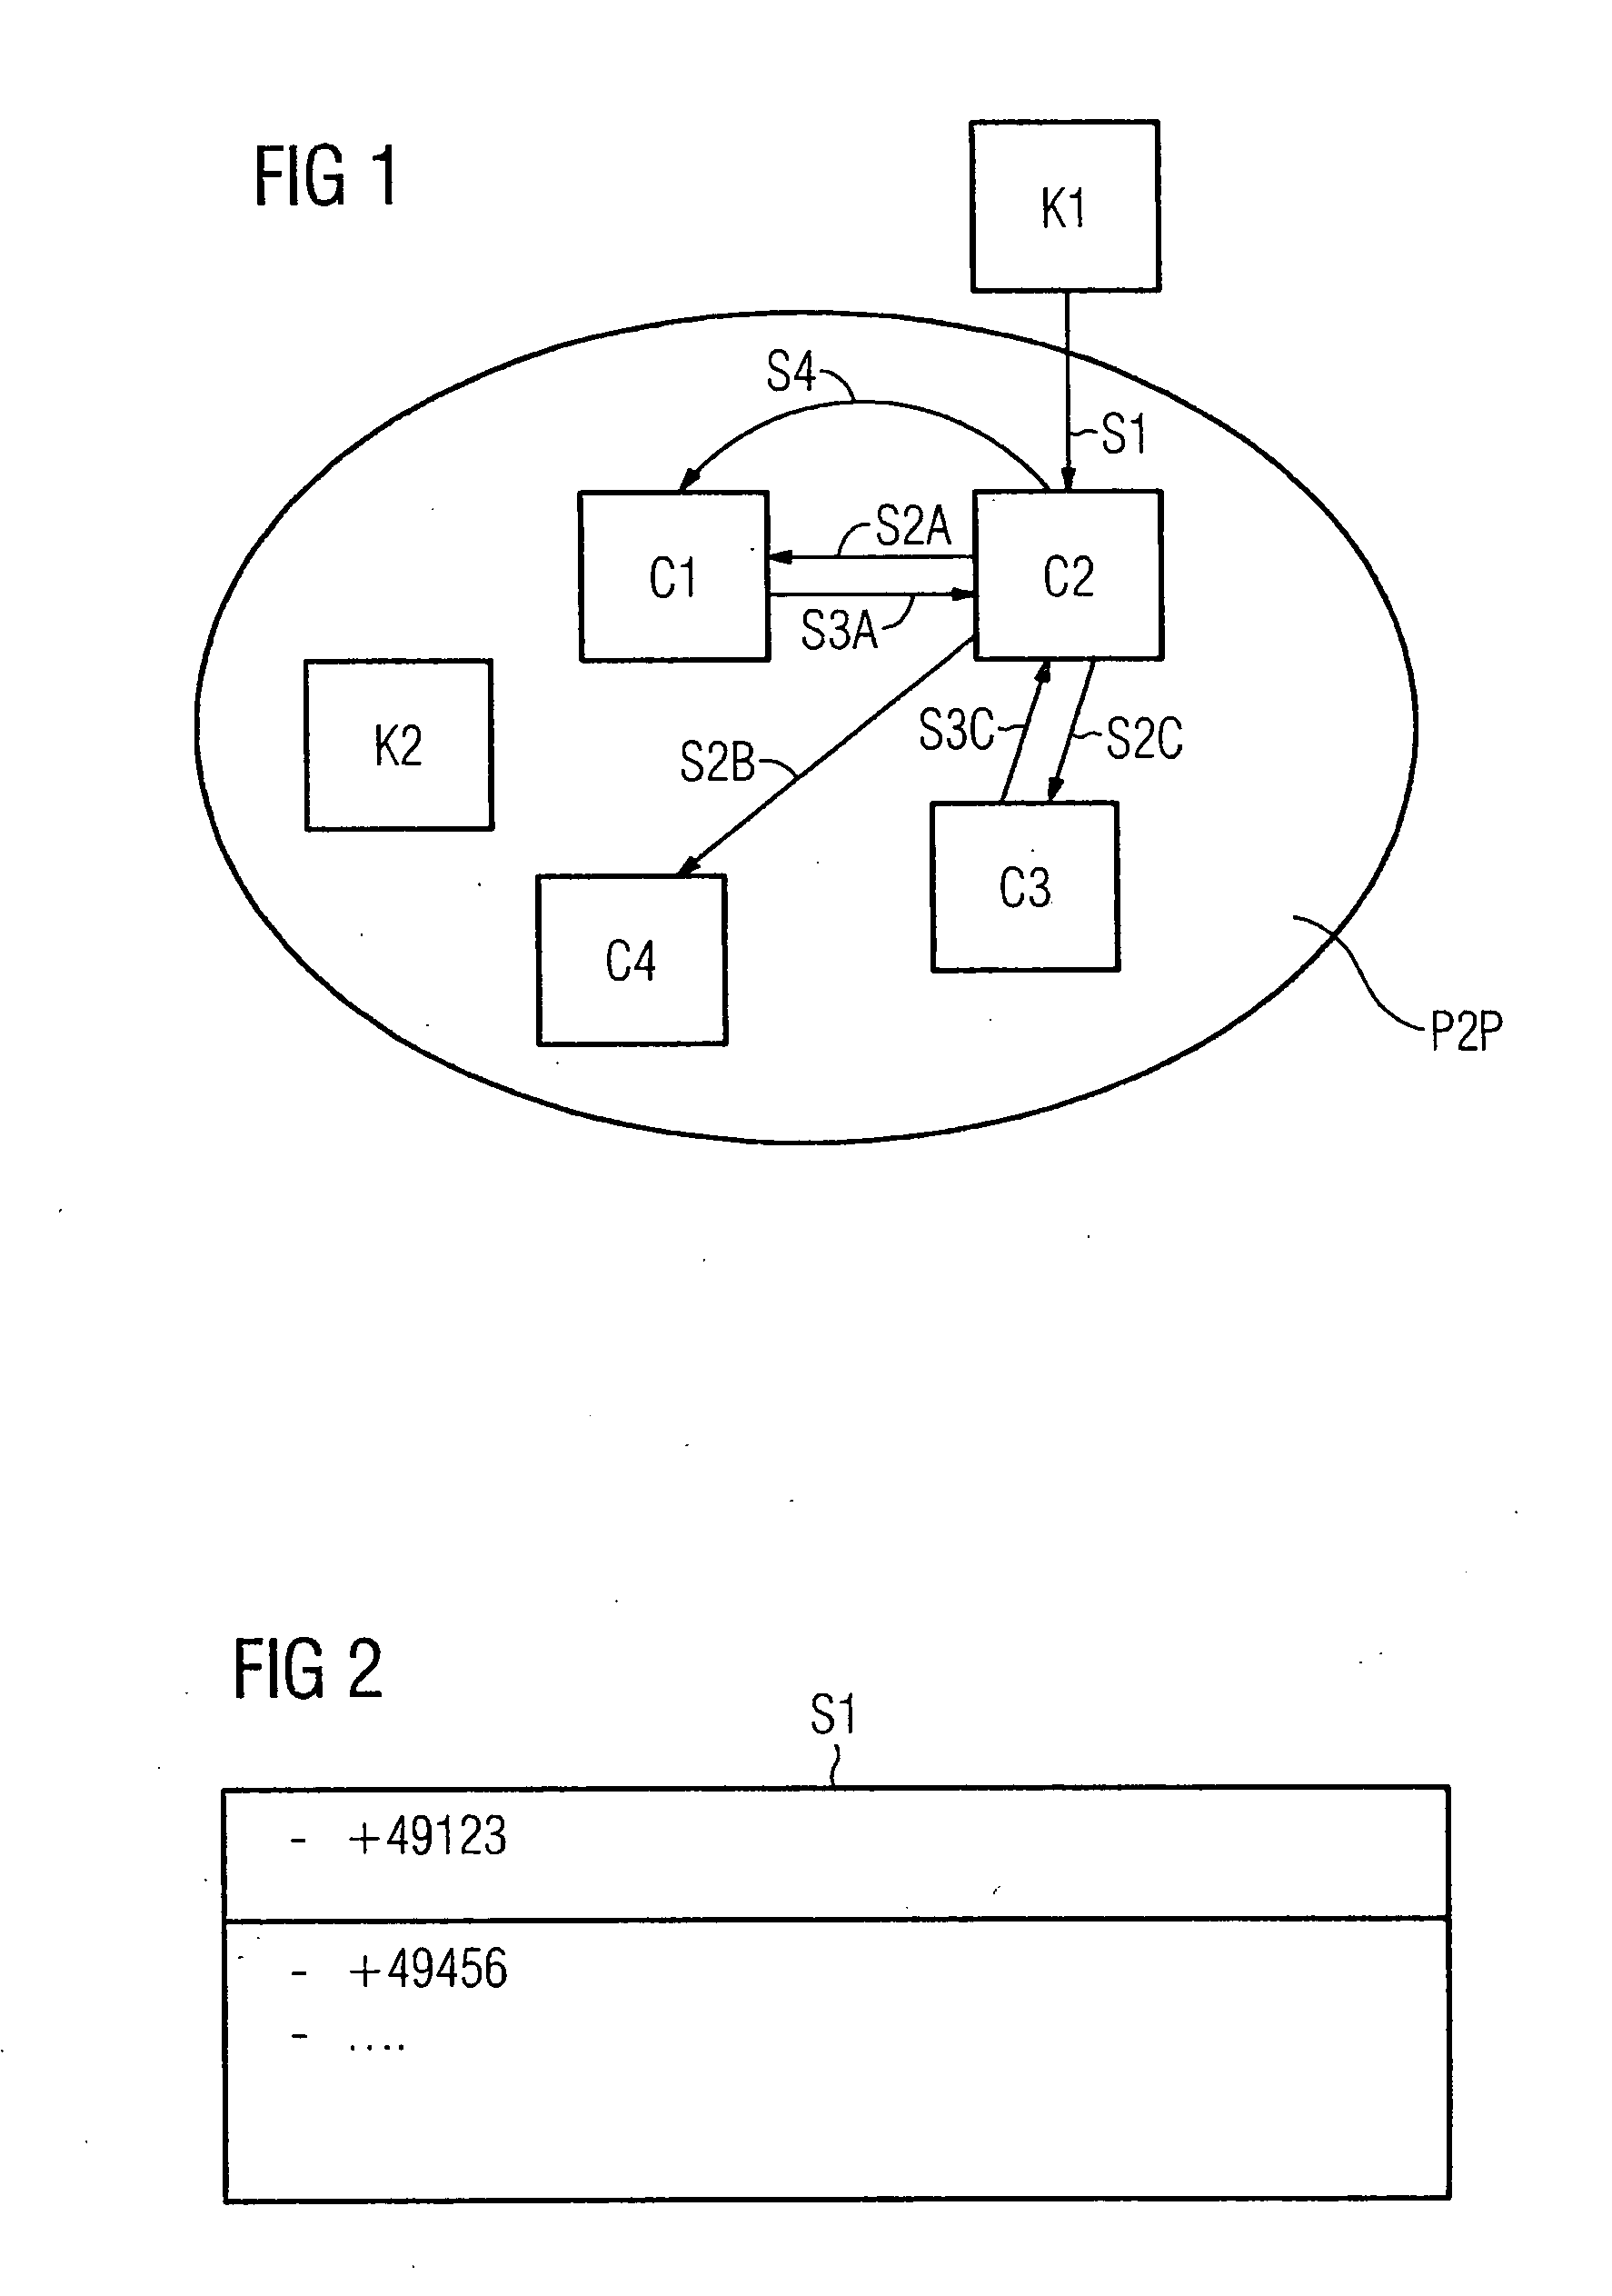 Call Distribution in a Direct-Communication Network